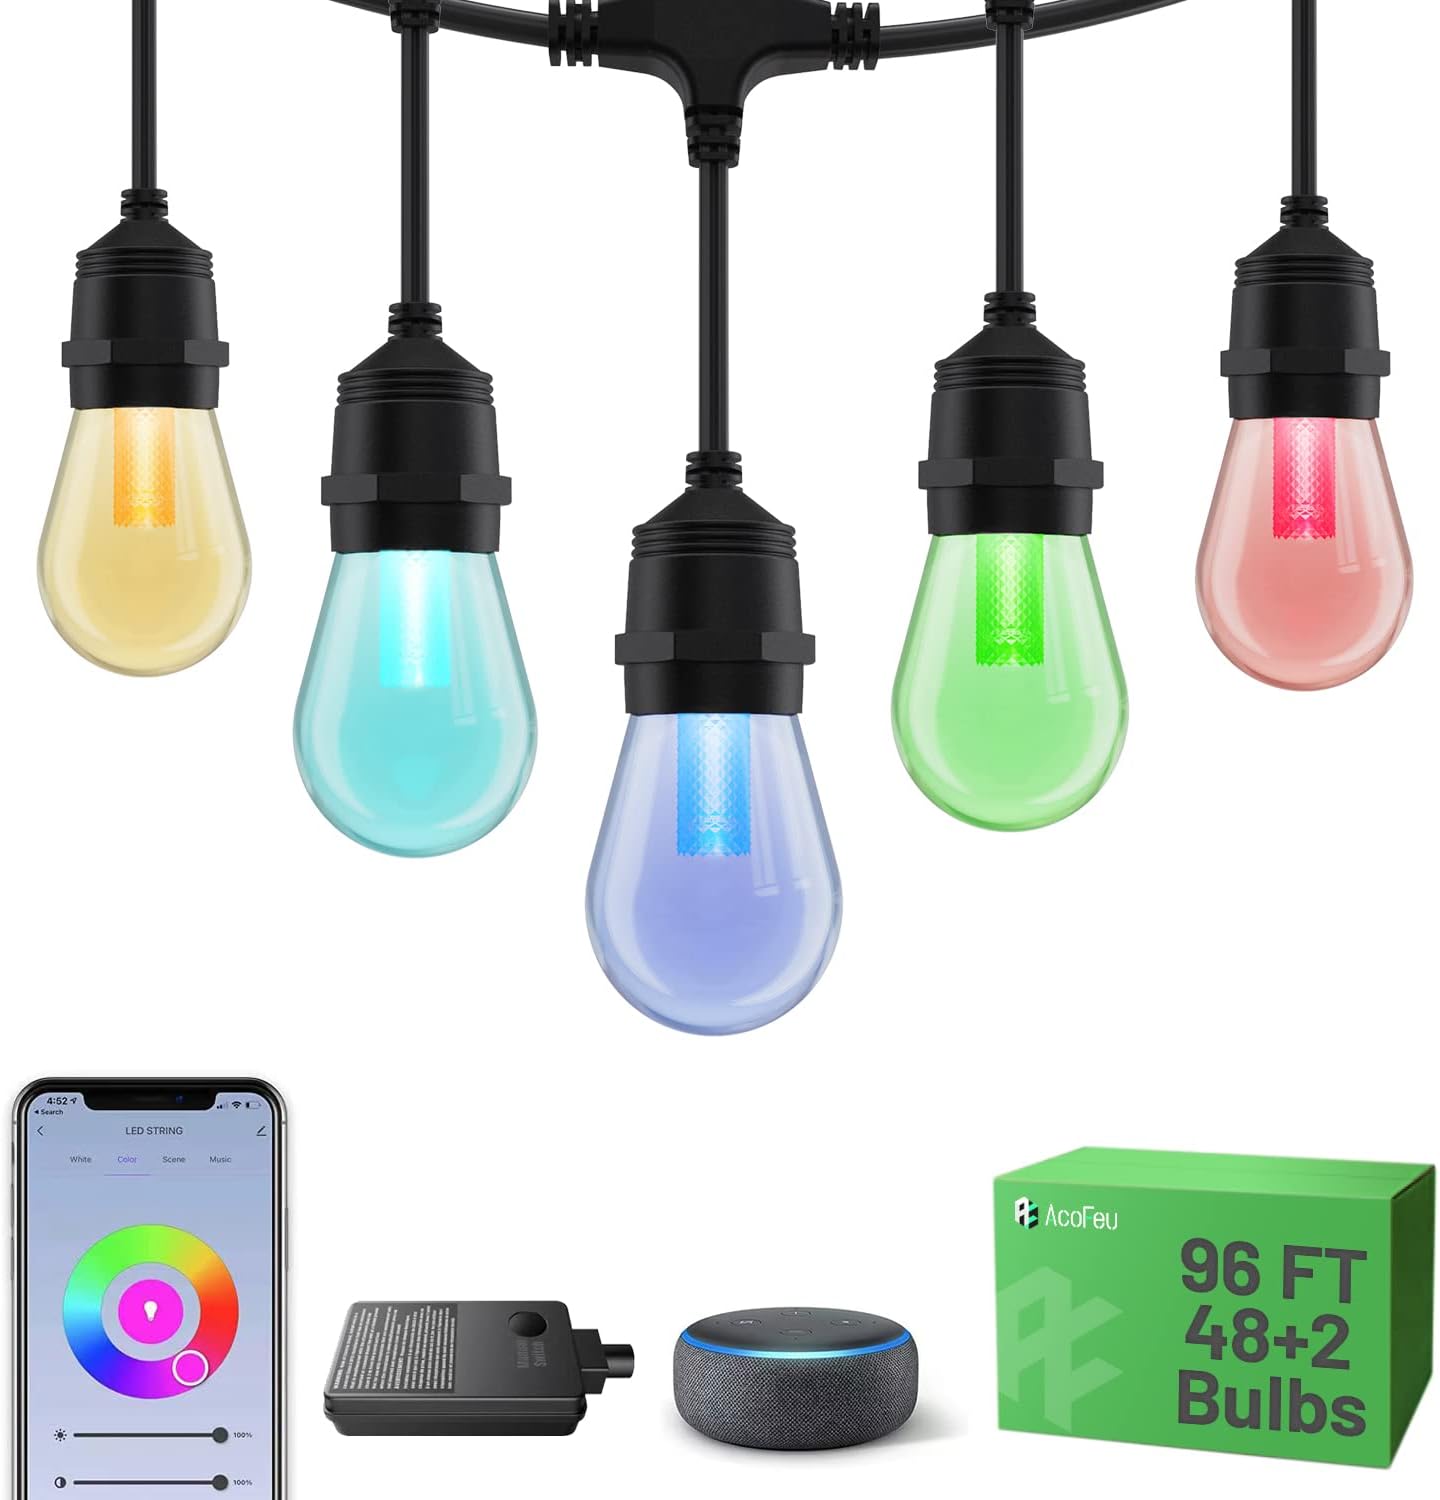 Bundle Smart Outdoor Waterproof Plugs with Outdoor String Dimmable Lights Color Changing APP WiFi Control 48FT or 96FT LED PET Bulbs IP65 for any Garden or holiday Party